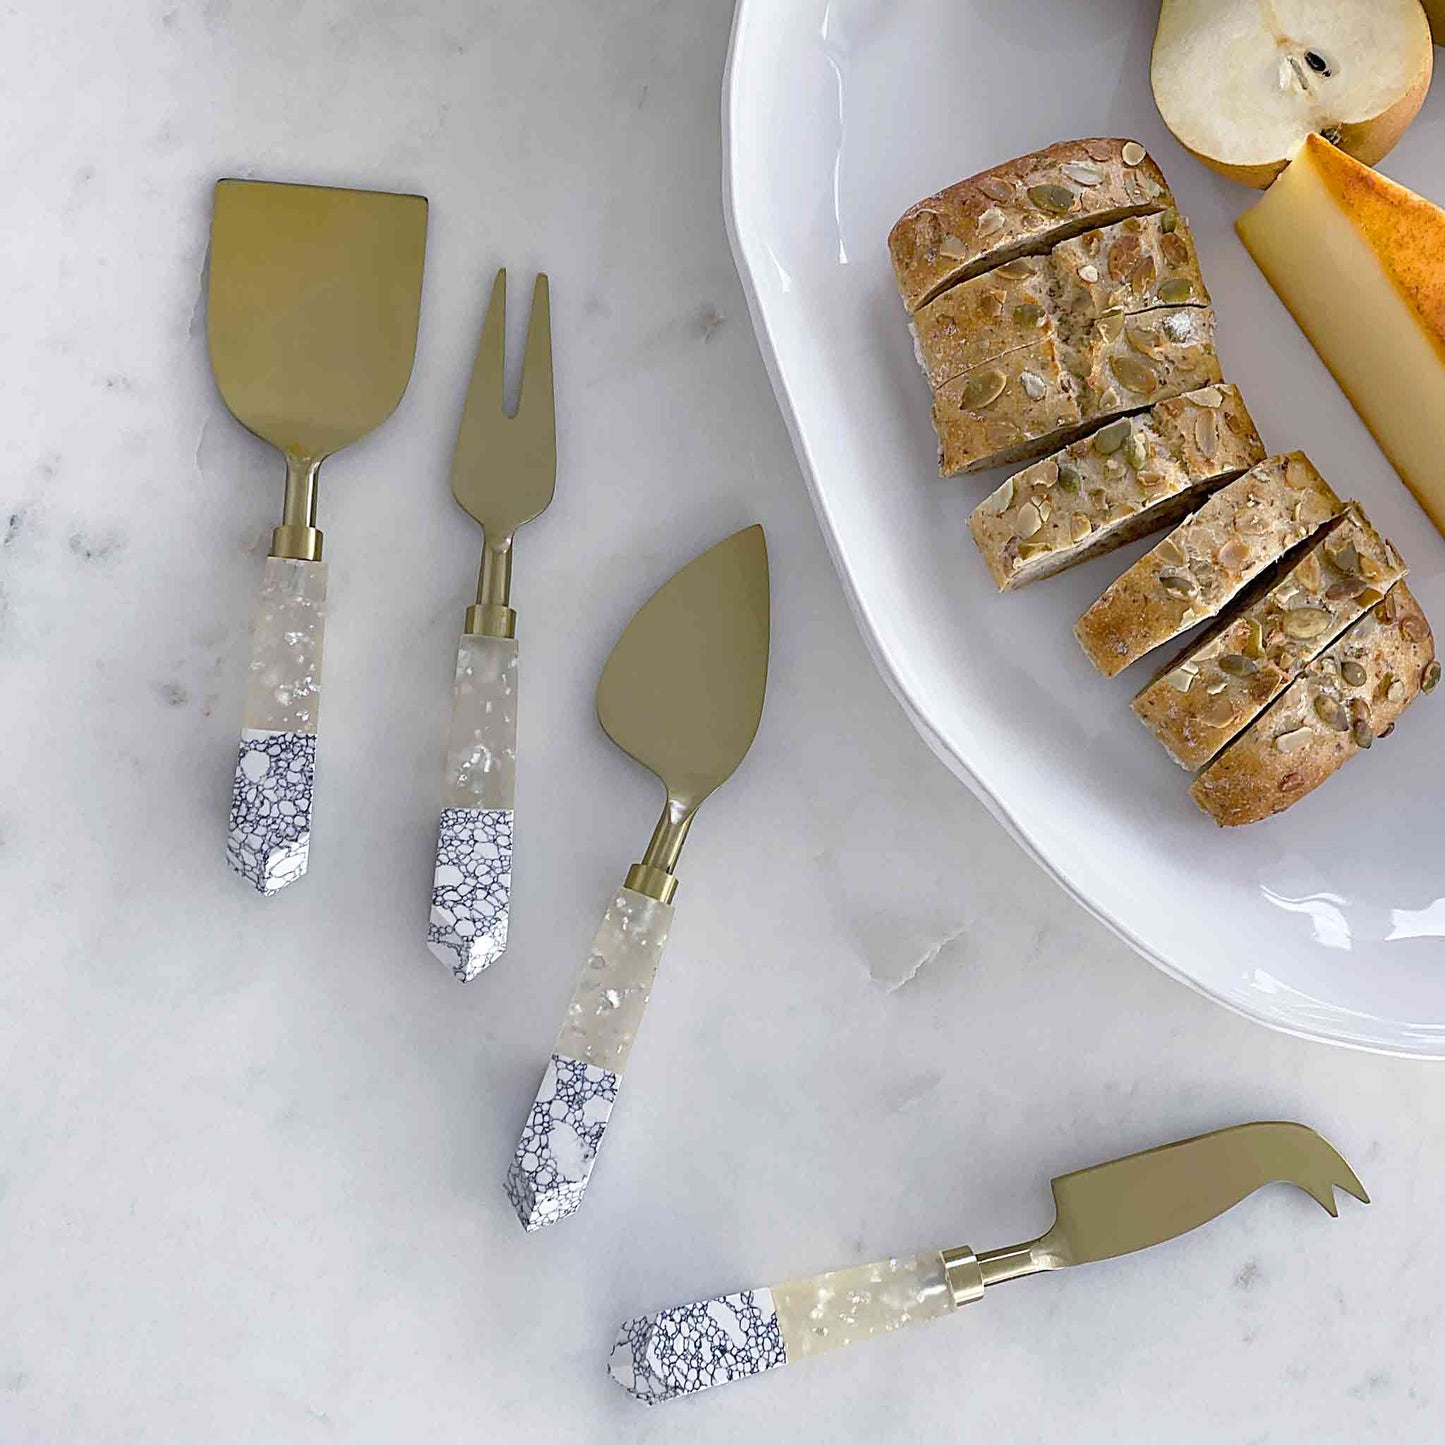 4 Piece Gold Resin Cheese Knife Set